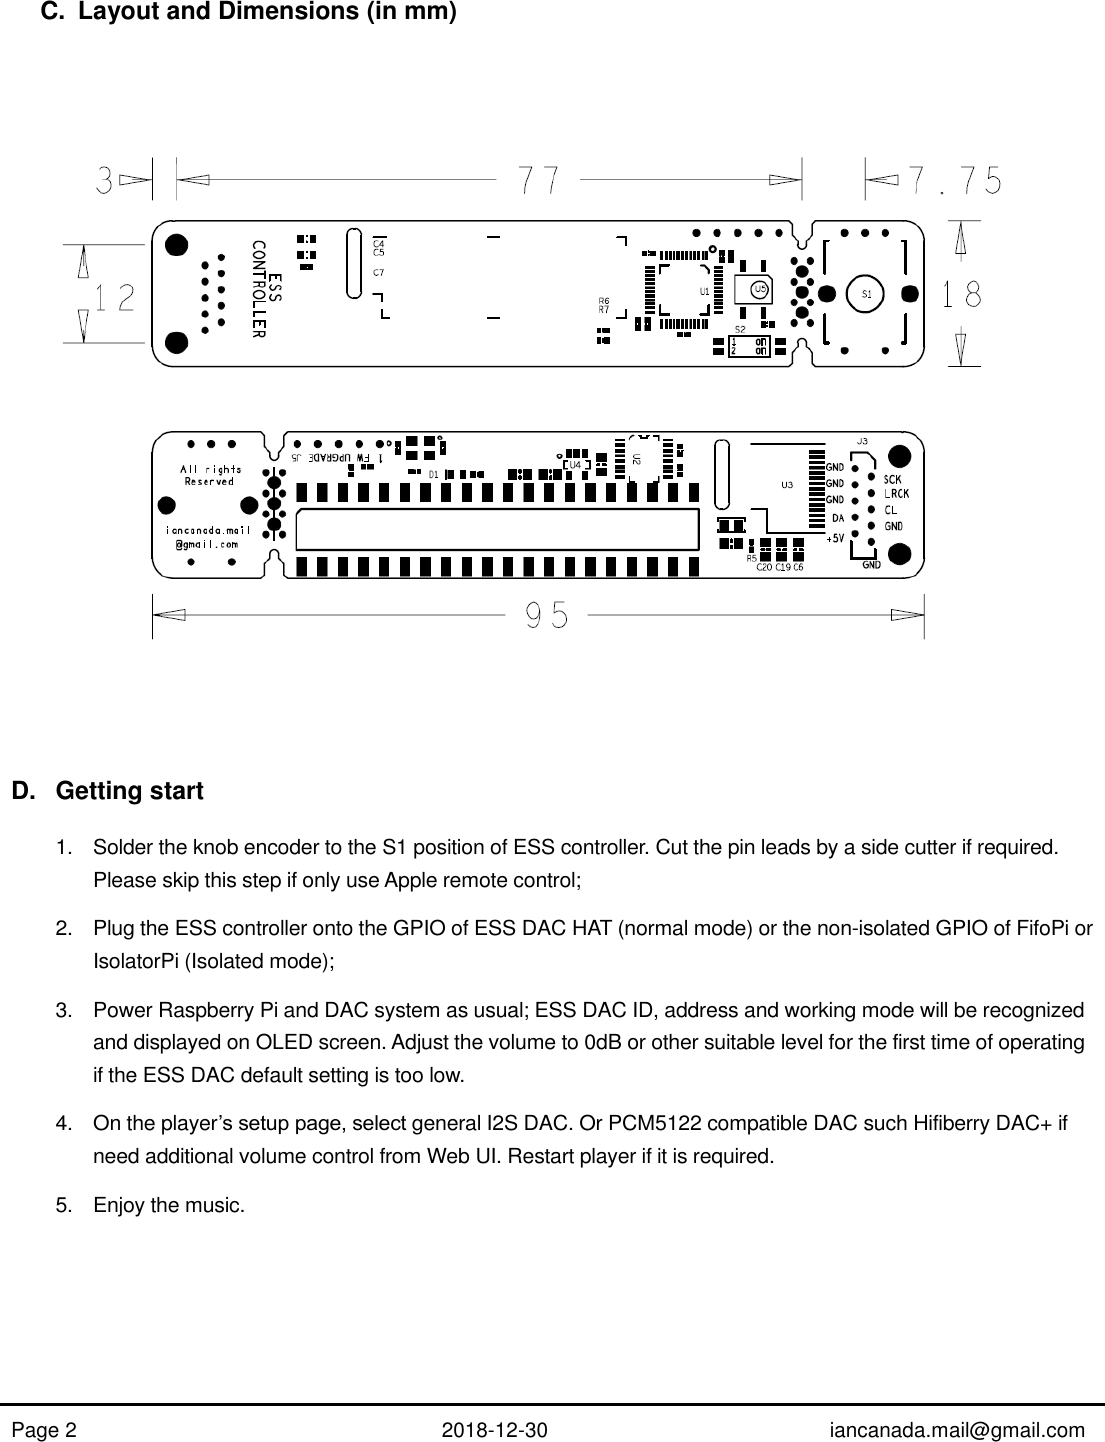 Page 2 of 11 - ESScontroller Manual